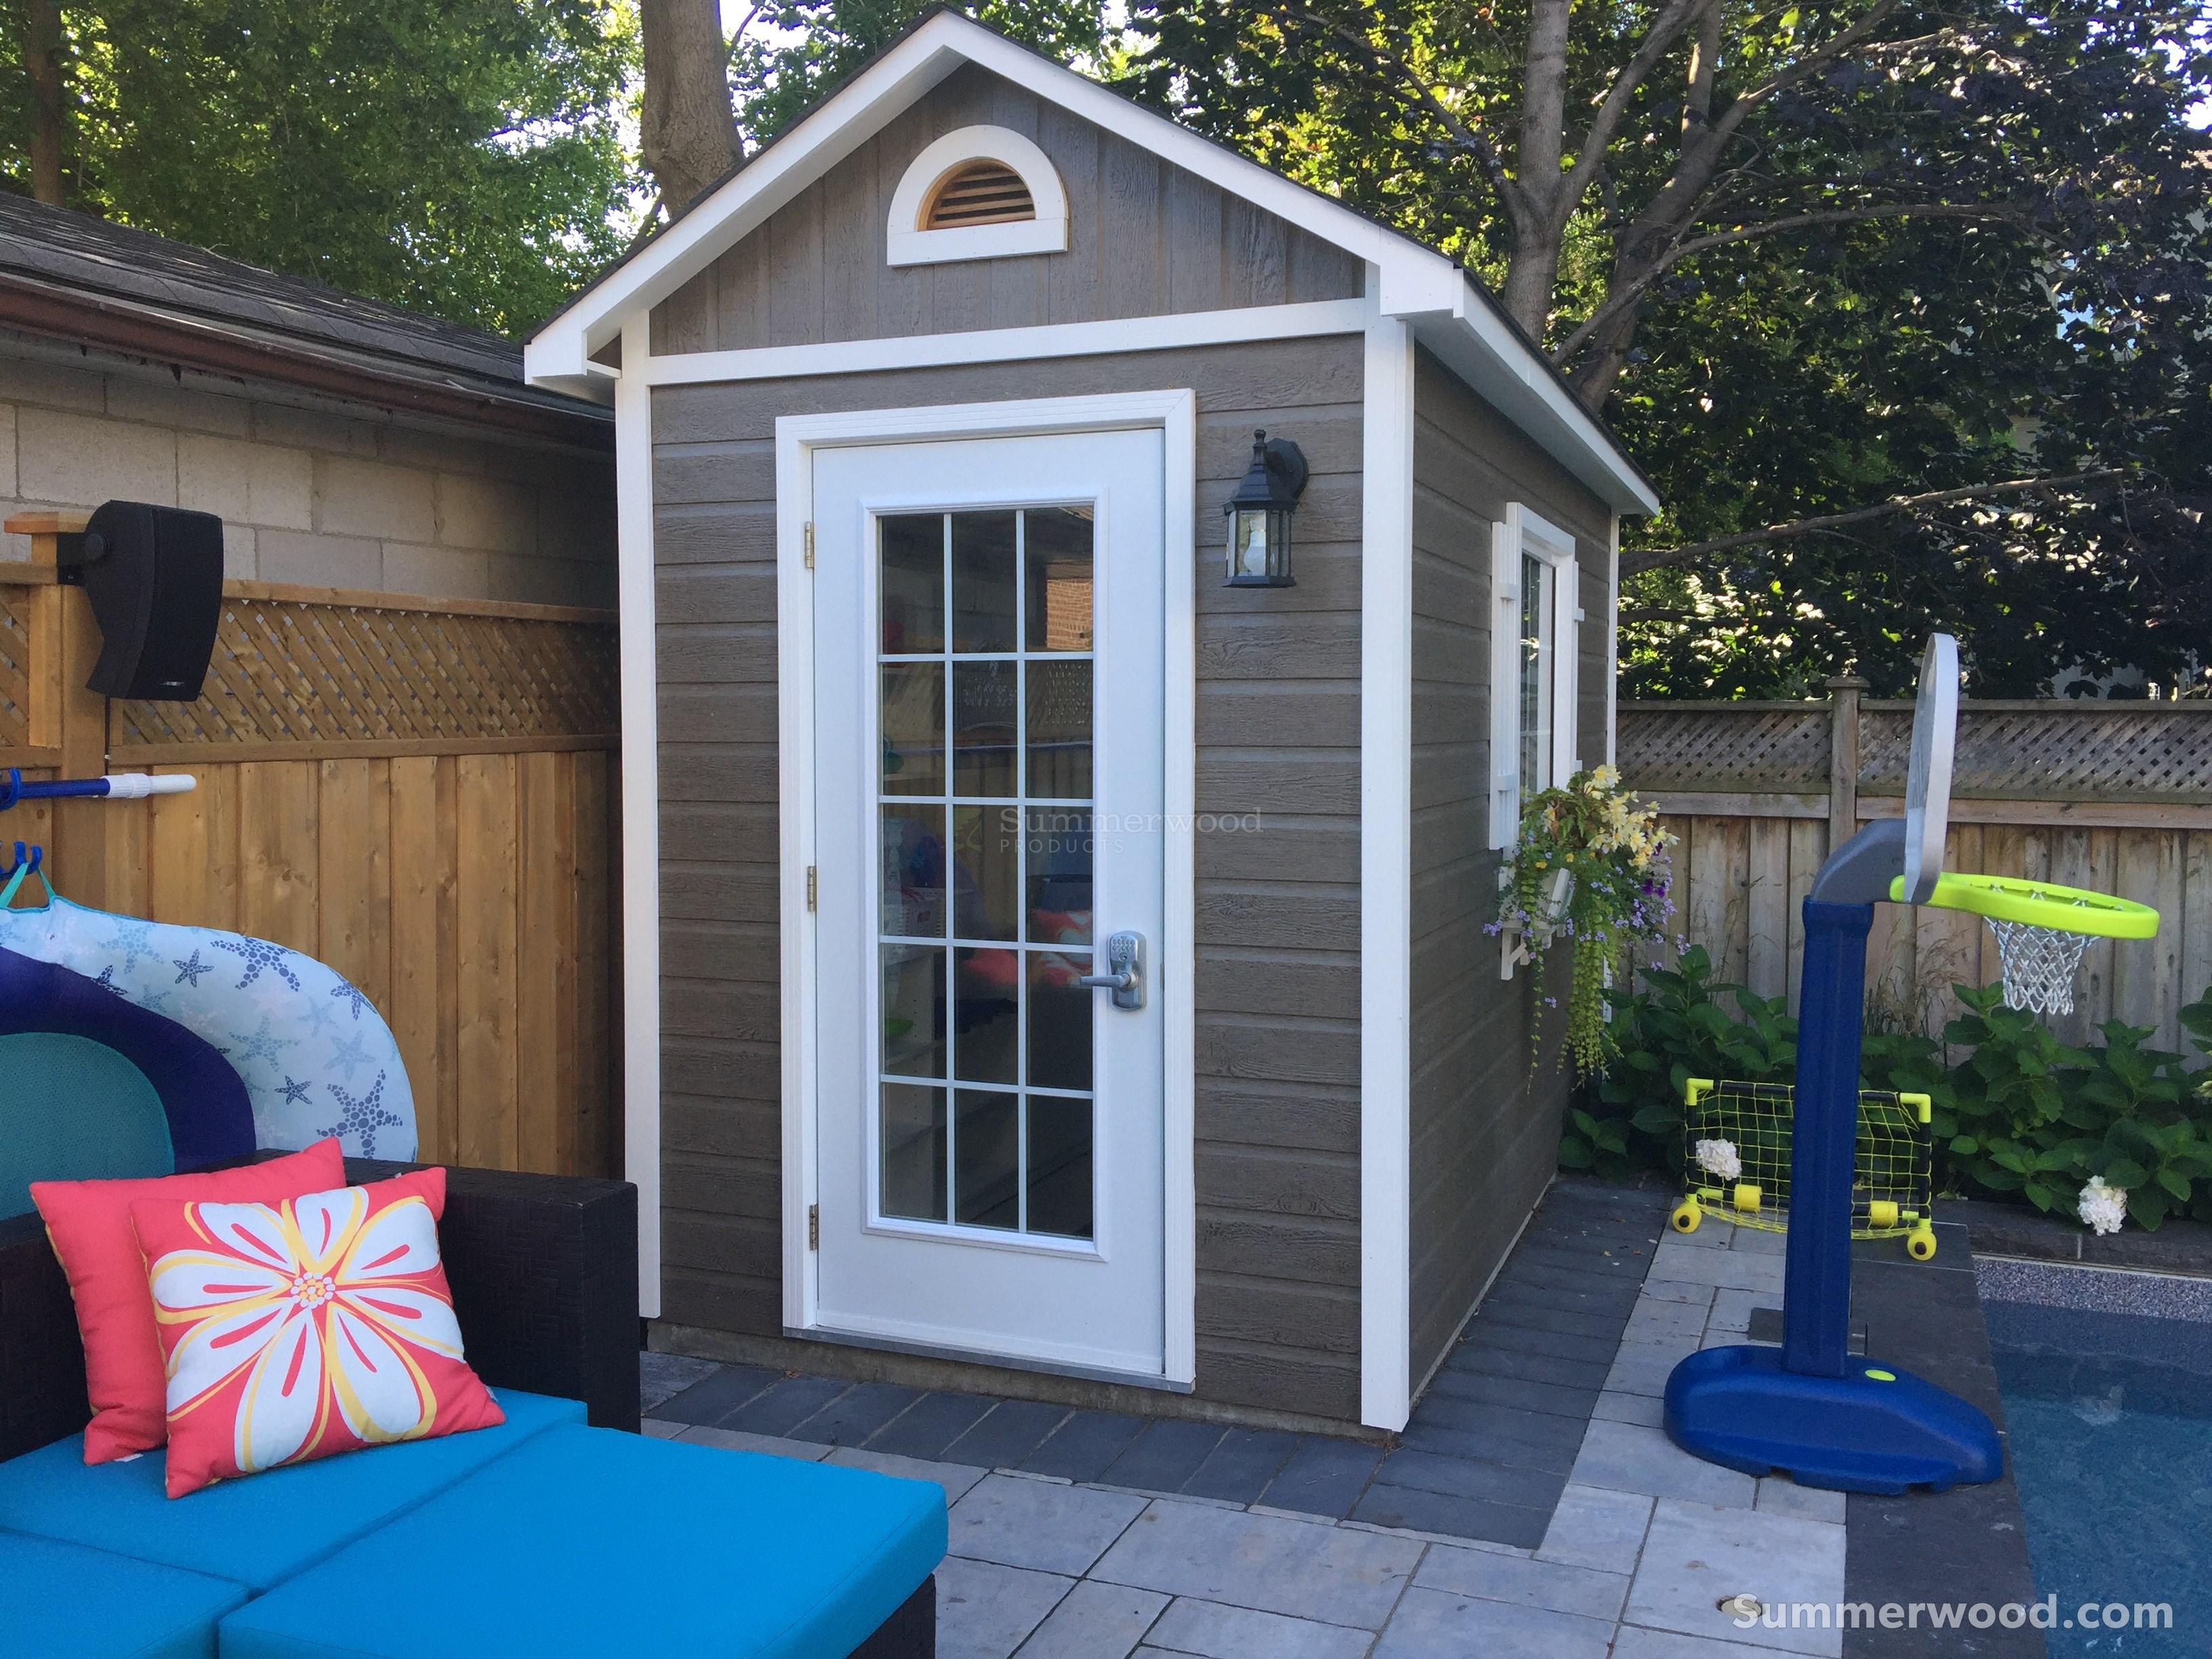 Canexel Palmerston pool cabana 6 x 12 with bunkie window in Toronto, ON. ID number 217712-1